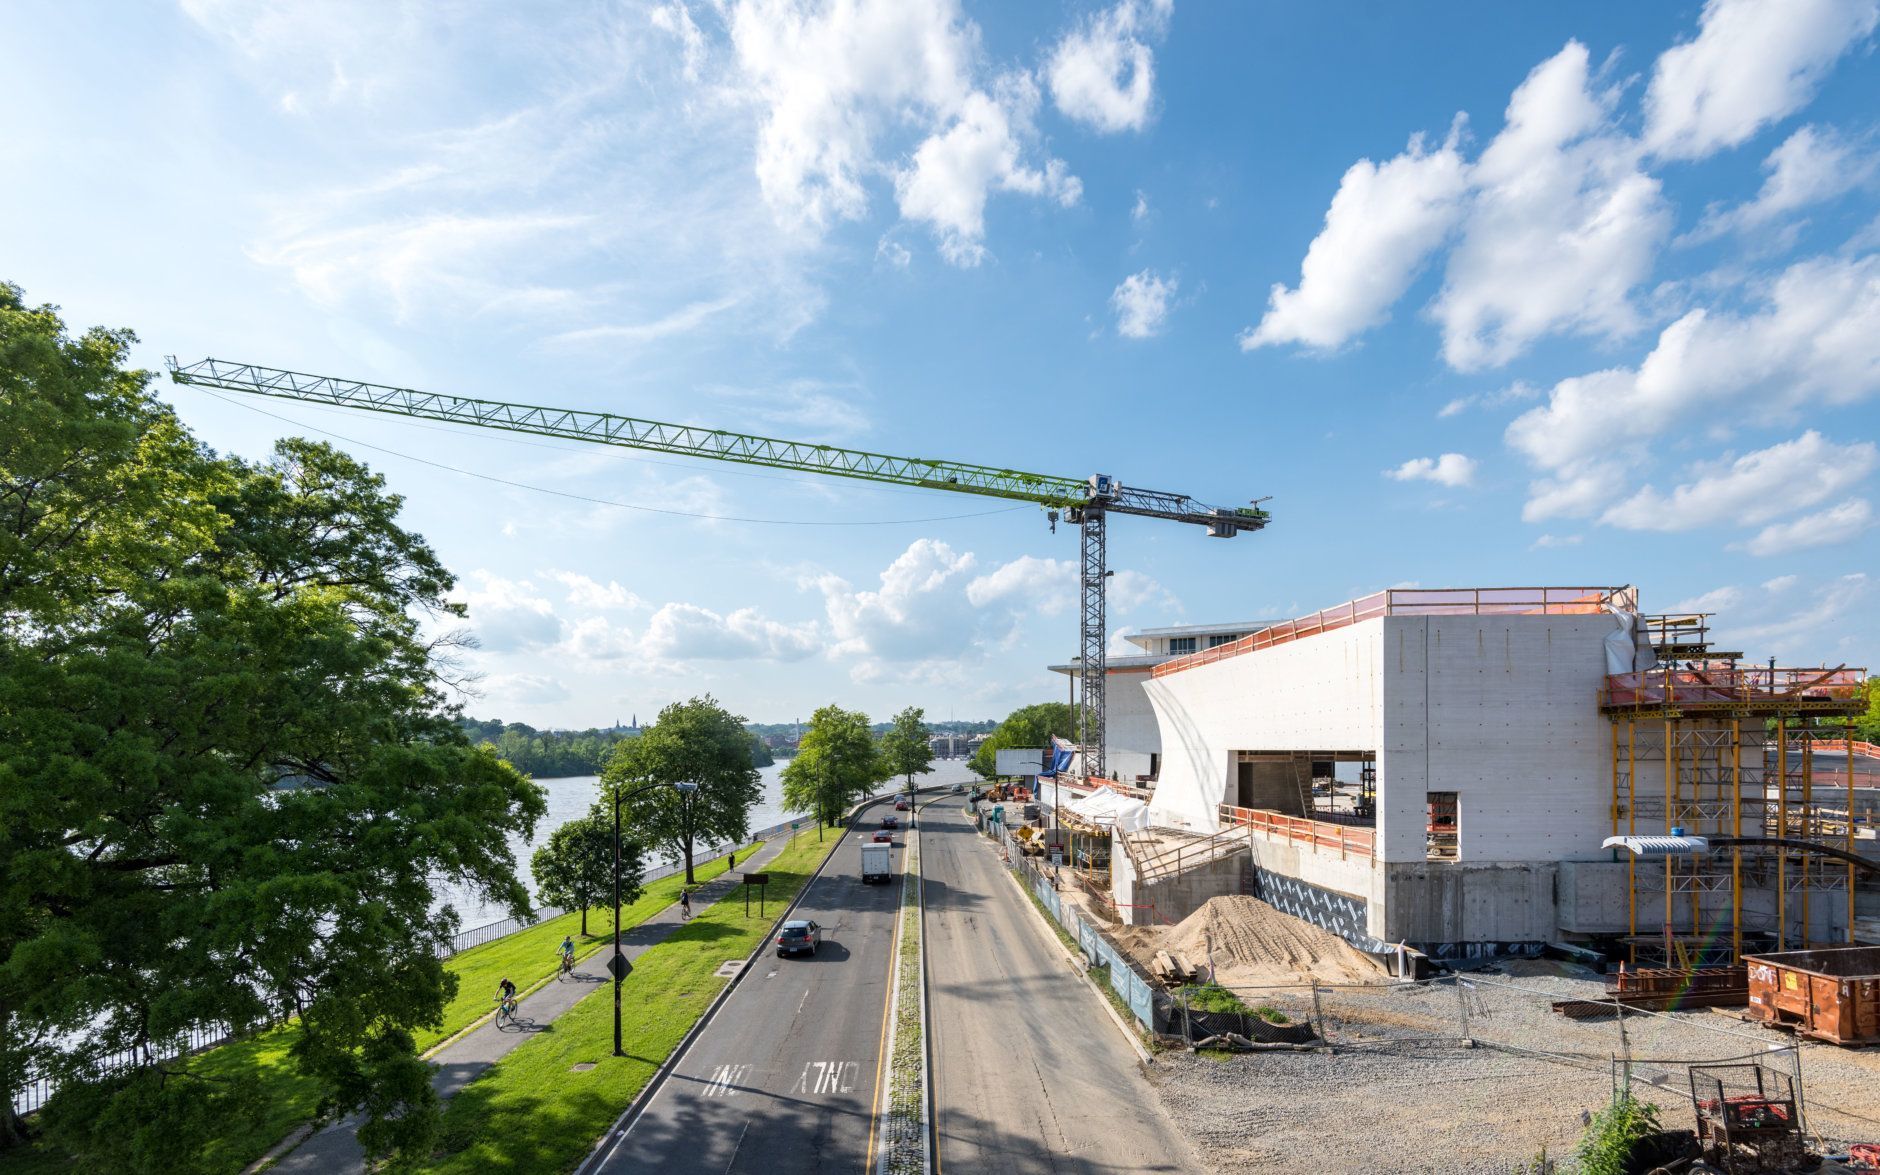 A view of part of the REACH campus at the Kennedy Center from Rock Creek Parkway in June 2018. (Courtesy Kennedy Center/Credit: Field Condition)